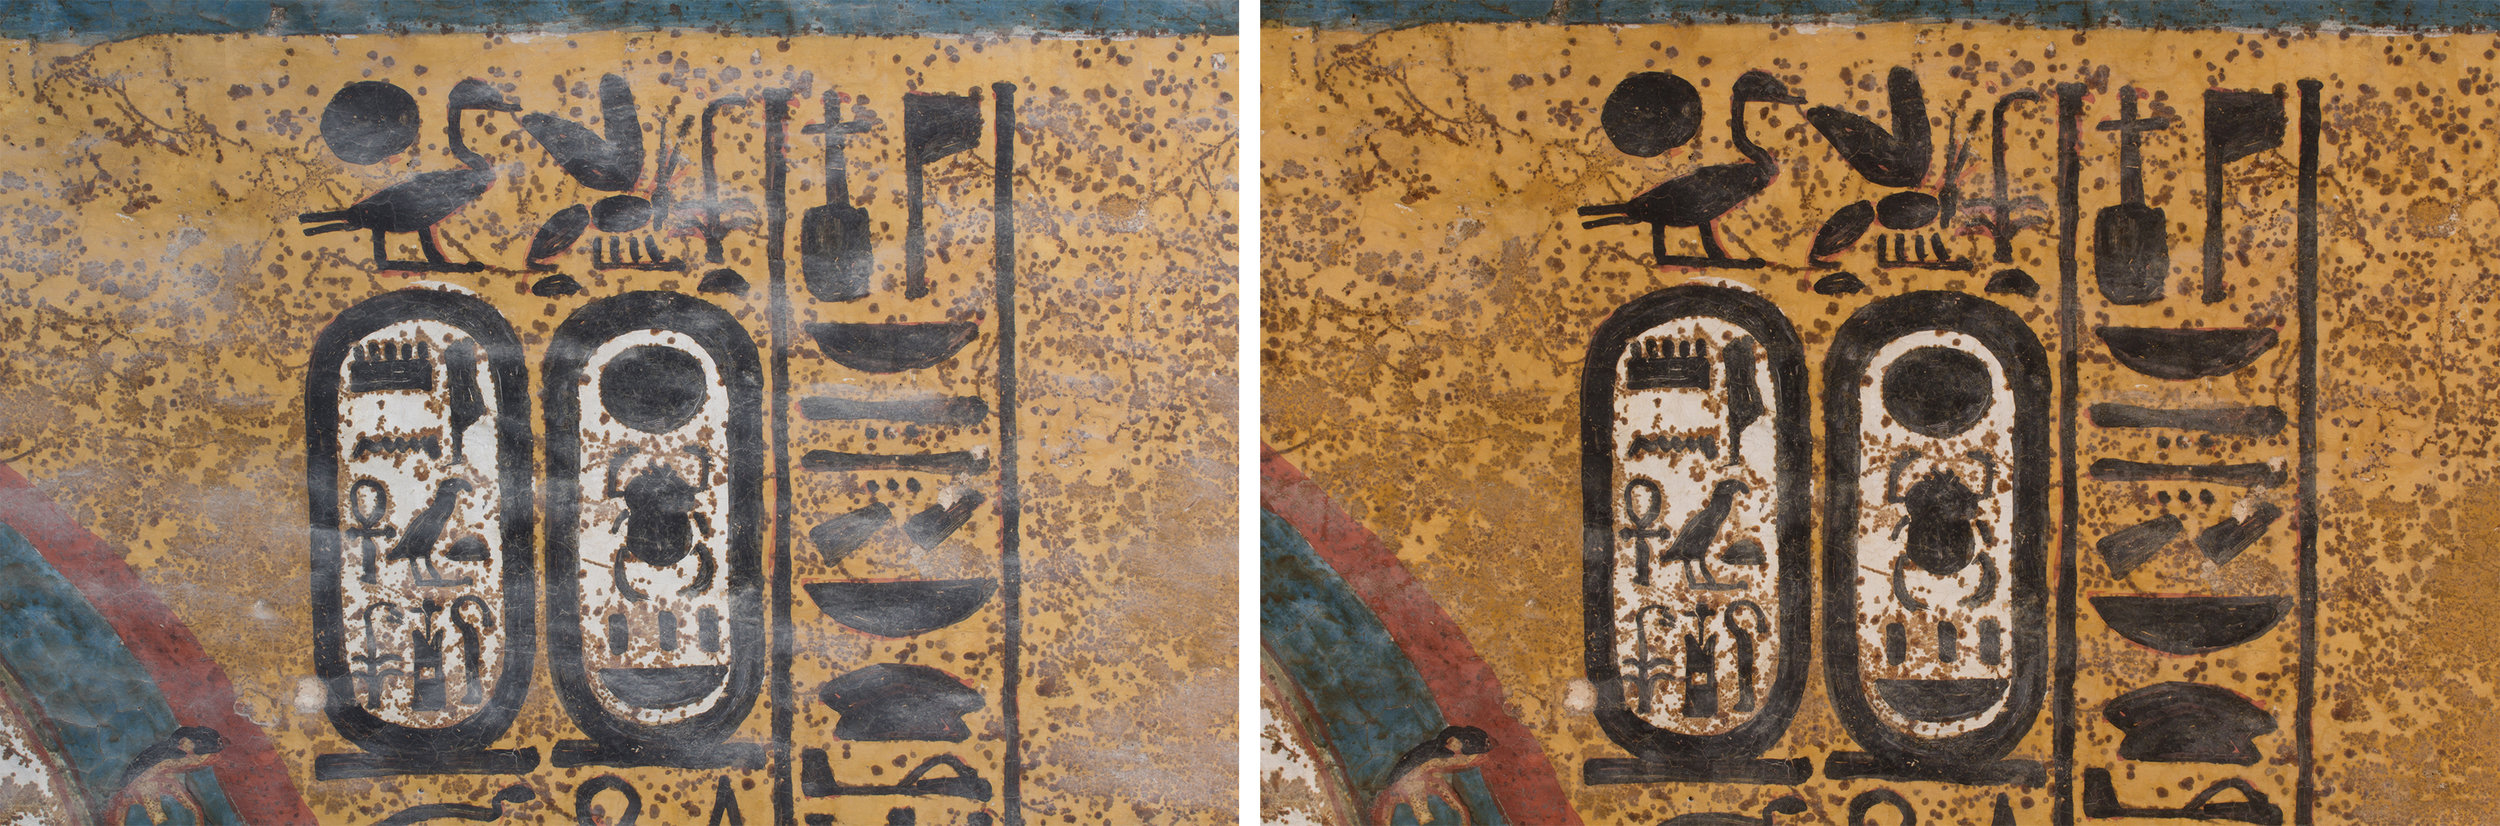  The wall painting before (left) and after (right) dust reduction.  Image © J. Paul Getty Trust, 2016 